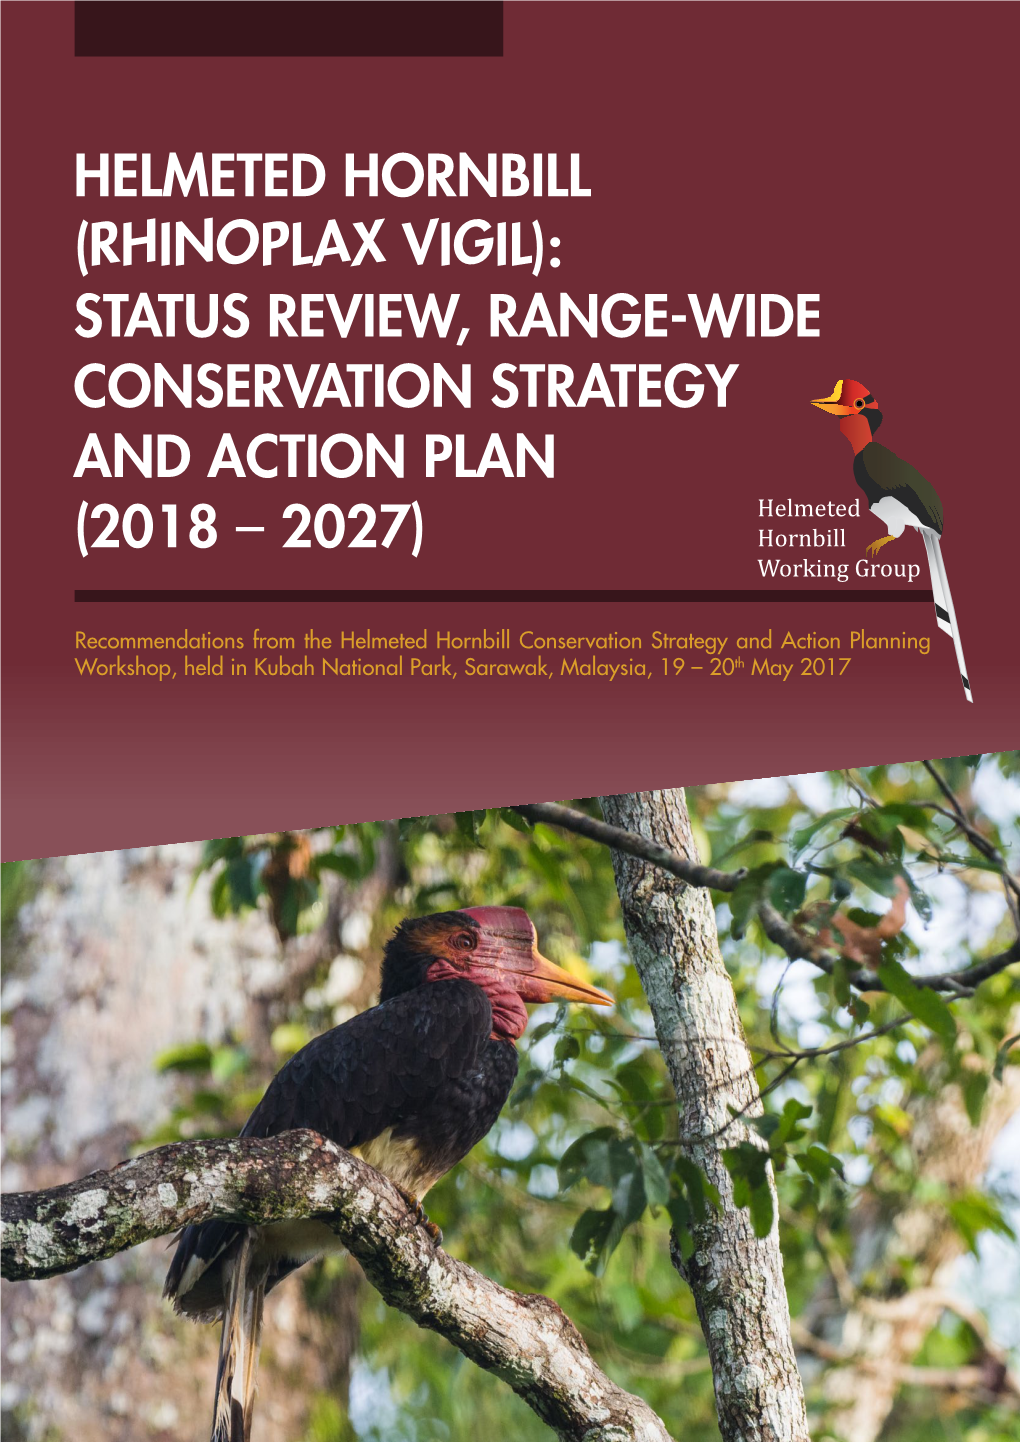 HELMETED HORNBILL (RHINOPLAX VIGIL): STATUS REVIEW, RANGE-WIDE CONSERVATION STRATEGY and ACTION PLAN Helmeted (2018 – 2027) Hornbill Working Group